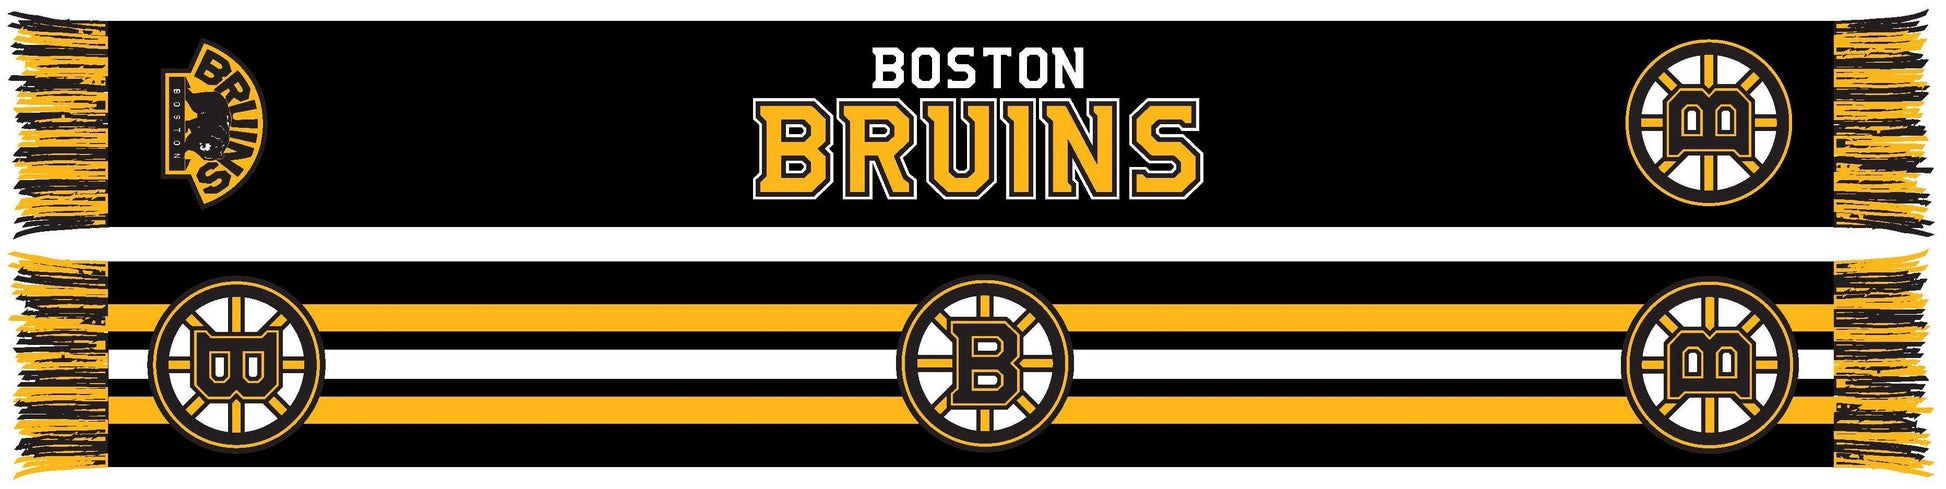 BOSTON BRUINS SCARF - Home Jersey